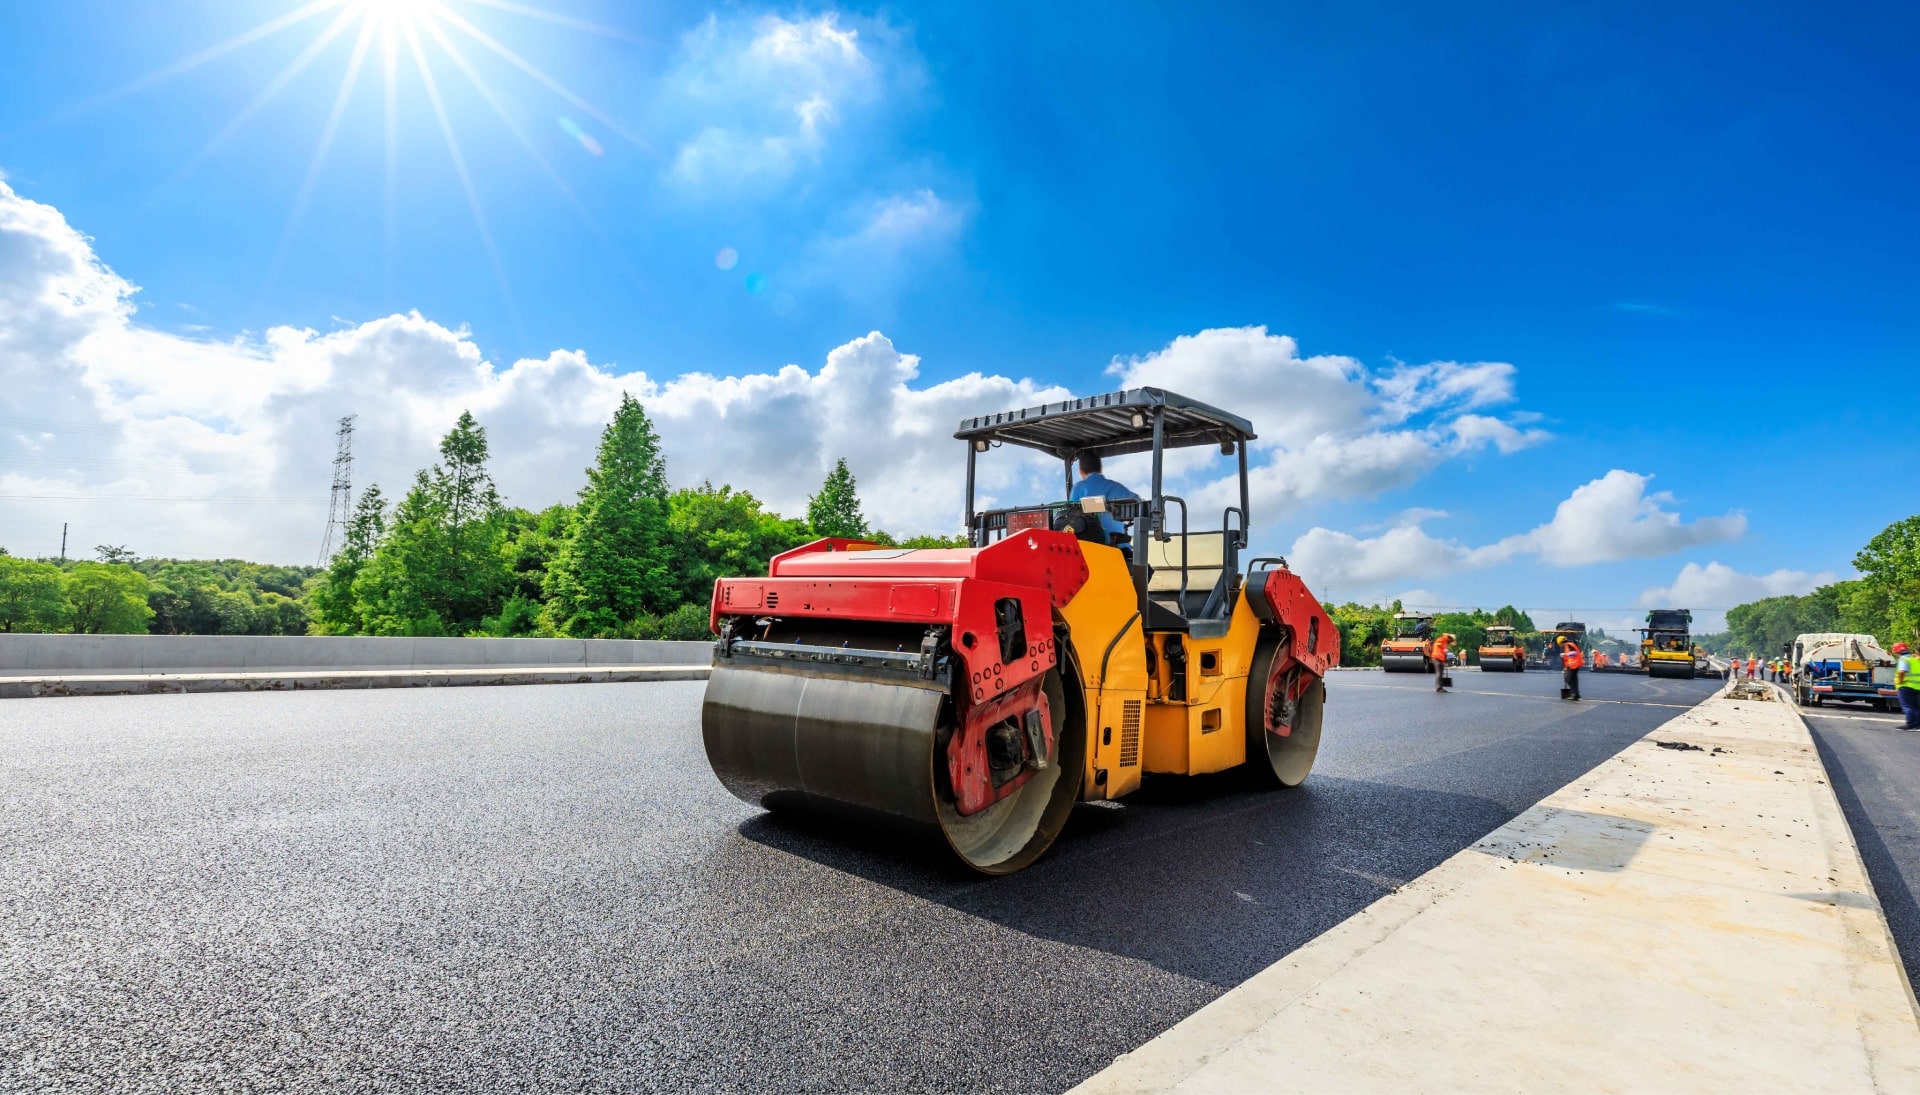 Get expert asphalt paving services for your commercial or residential property in Ann Arbor, MI with top-quality materials and professional installation.